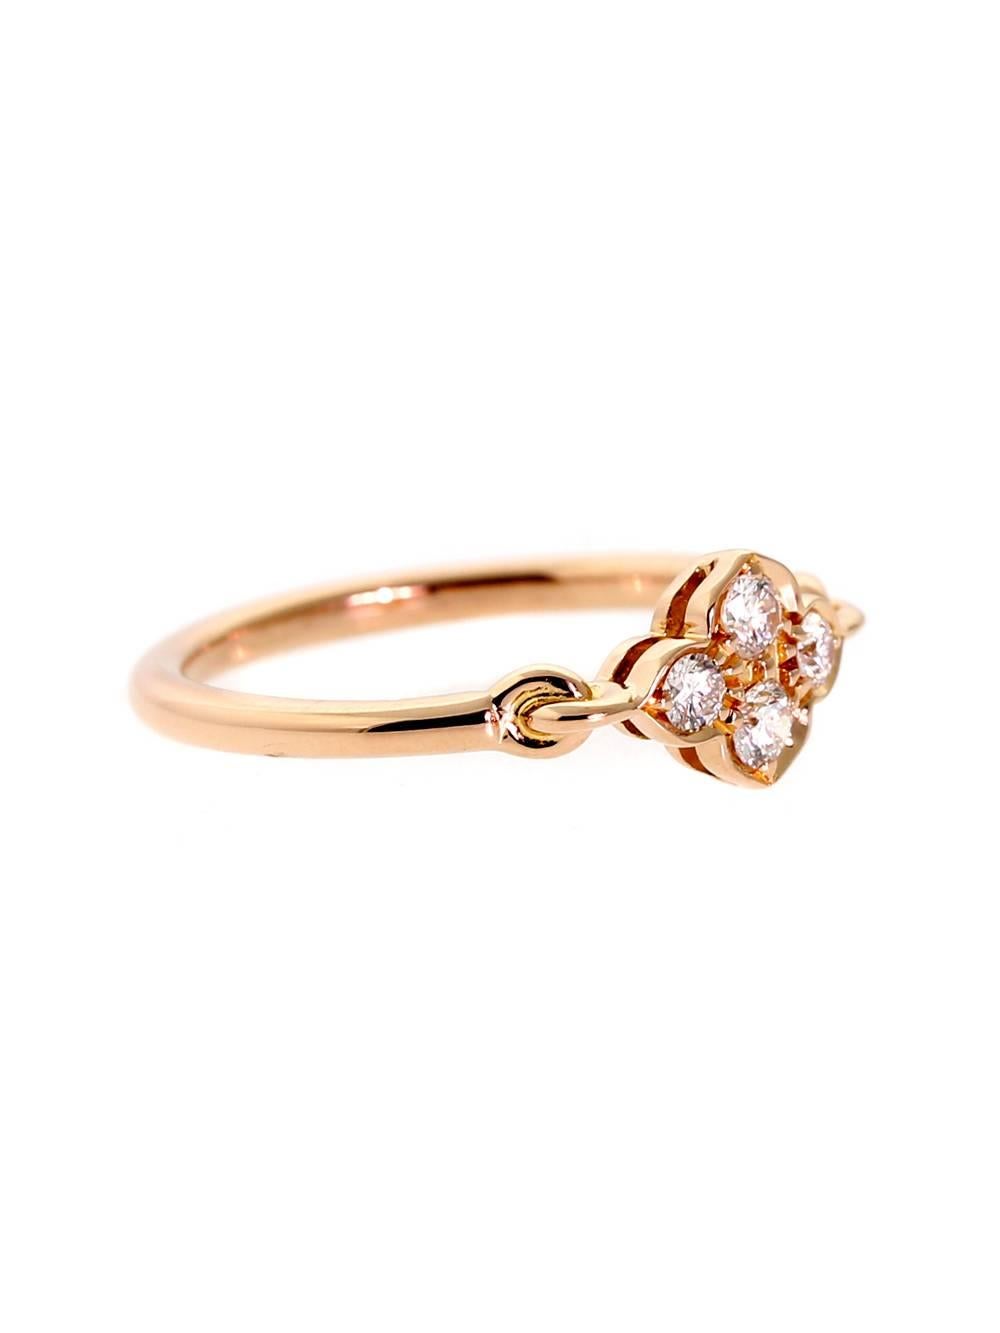 A classic Cartier flower diamond ring adorned with 4 round brilliant cut diamonds set in 18k rose gold. The ring is a size 3.75 and is resizeable.

Inventory ID: 0000329